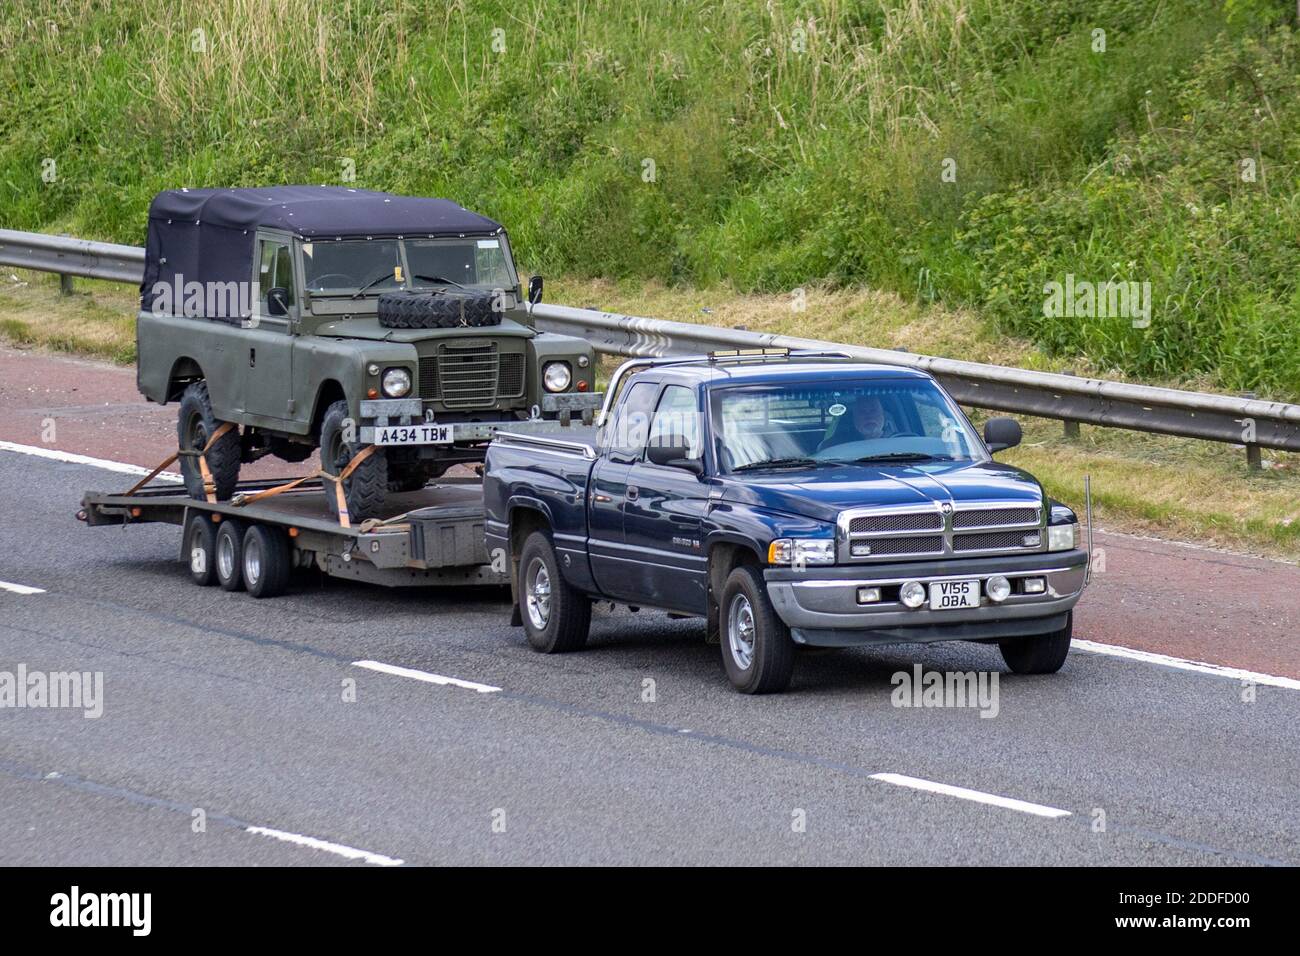 Left hand drive 2000 American Chrysler SUV pickup truck towing 1983 green Land Rover 109' - 6 CYL on trailer; Vehicular traffic, moving vehicles, cars, vehicle driving on UK roads, USA motors, motoring on the M6 motorway highway UK road network. Stock Photo